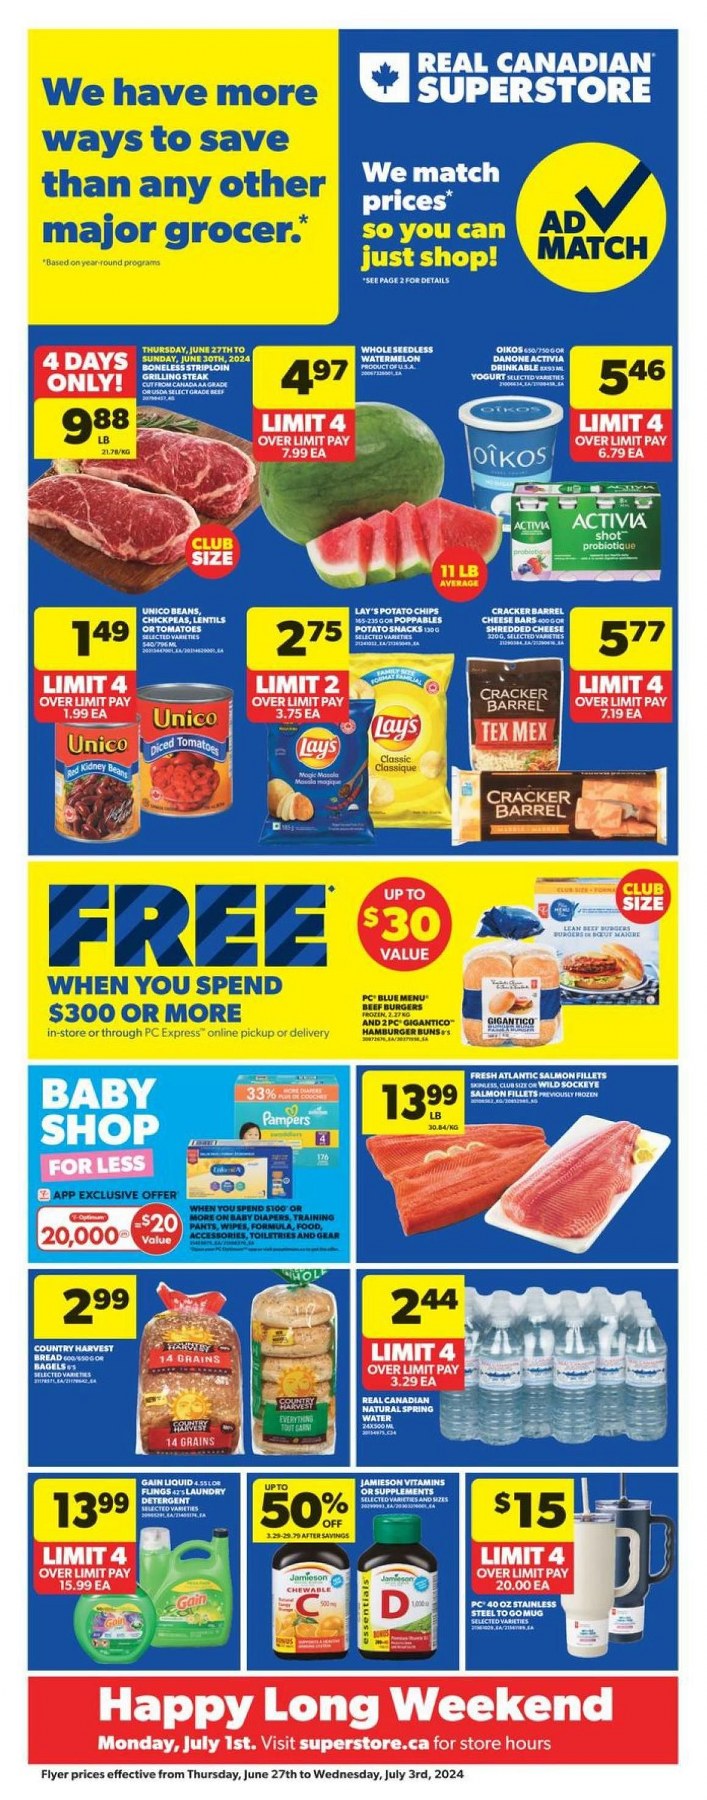 real canadian superstore west flyer june 27 to july 3 2